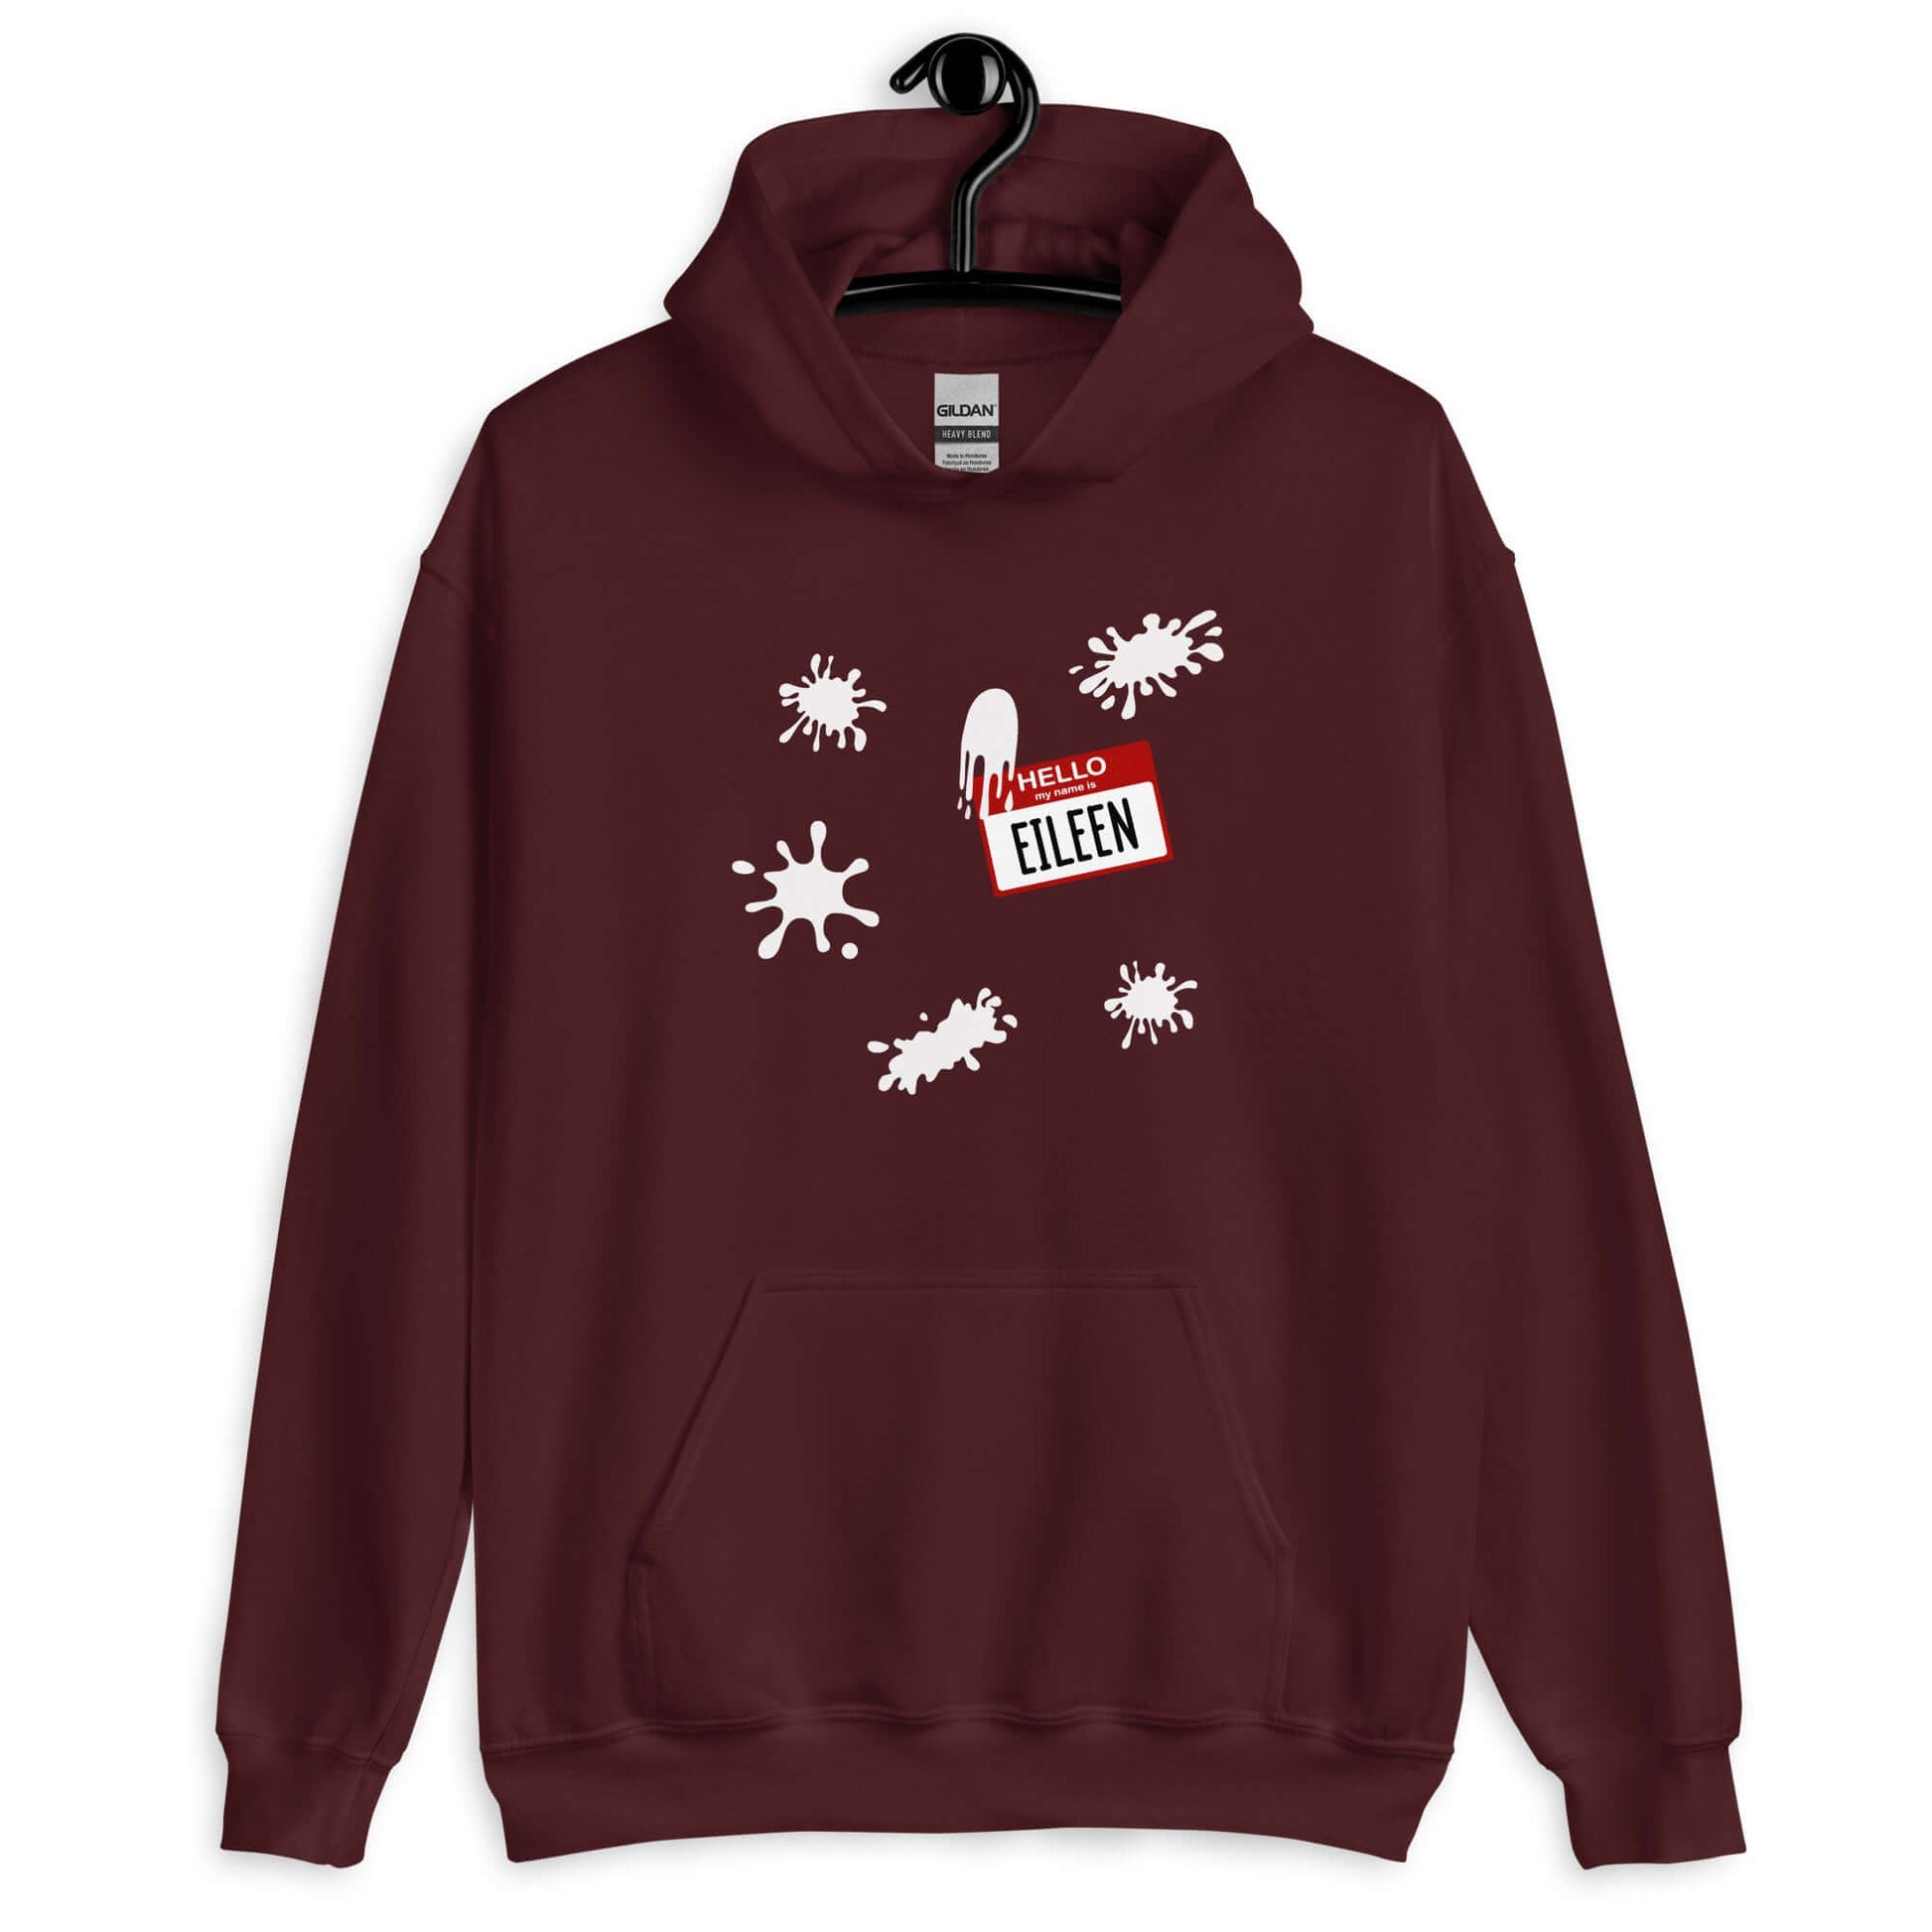 Maroon hoodie sweatshirt with Eileen name tag and white splatters printed on the front.